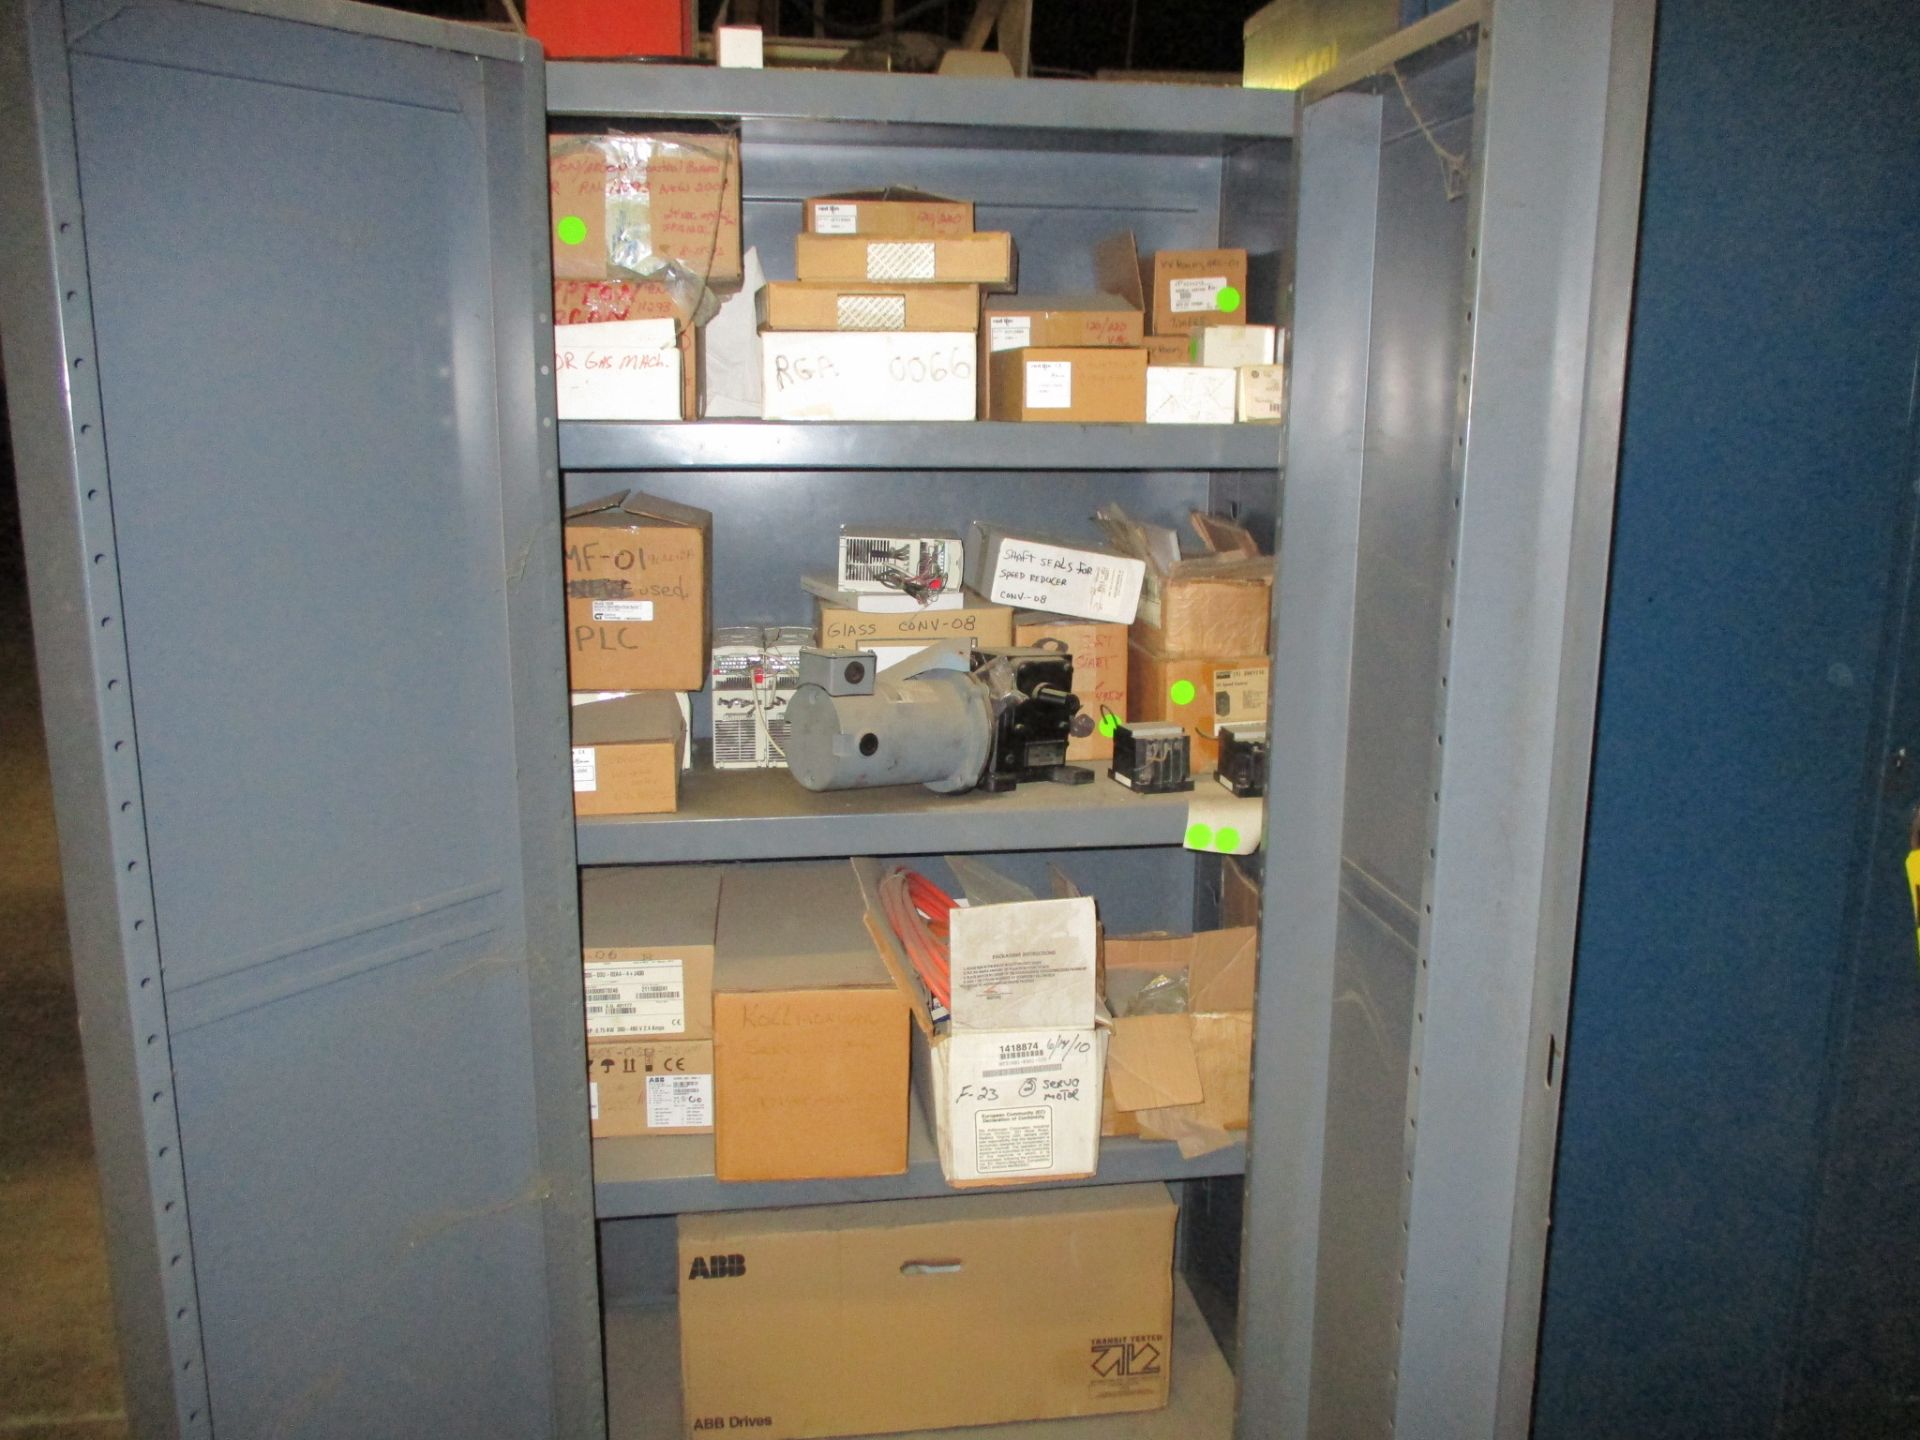 2-Door Heavy Duty Parts Storage Cabinet with Part Bins and Contents - Image 2 of 2